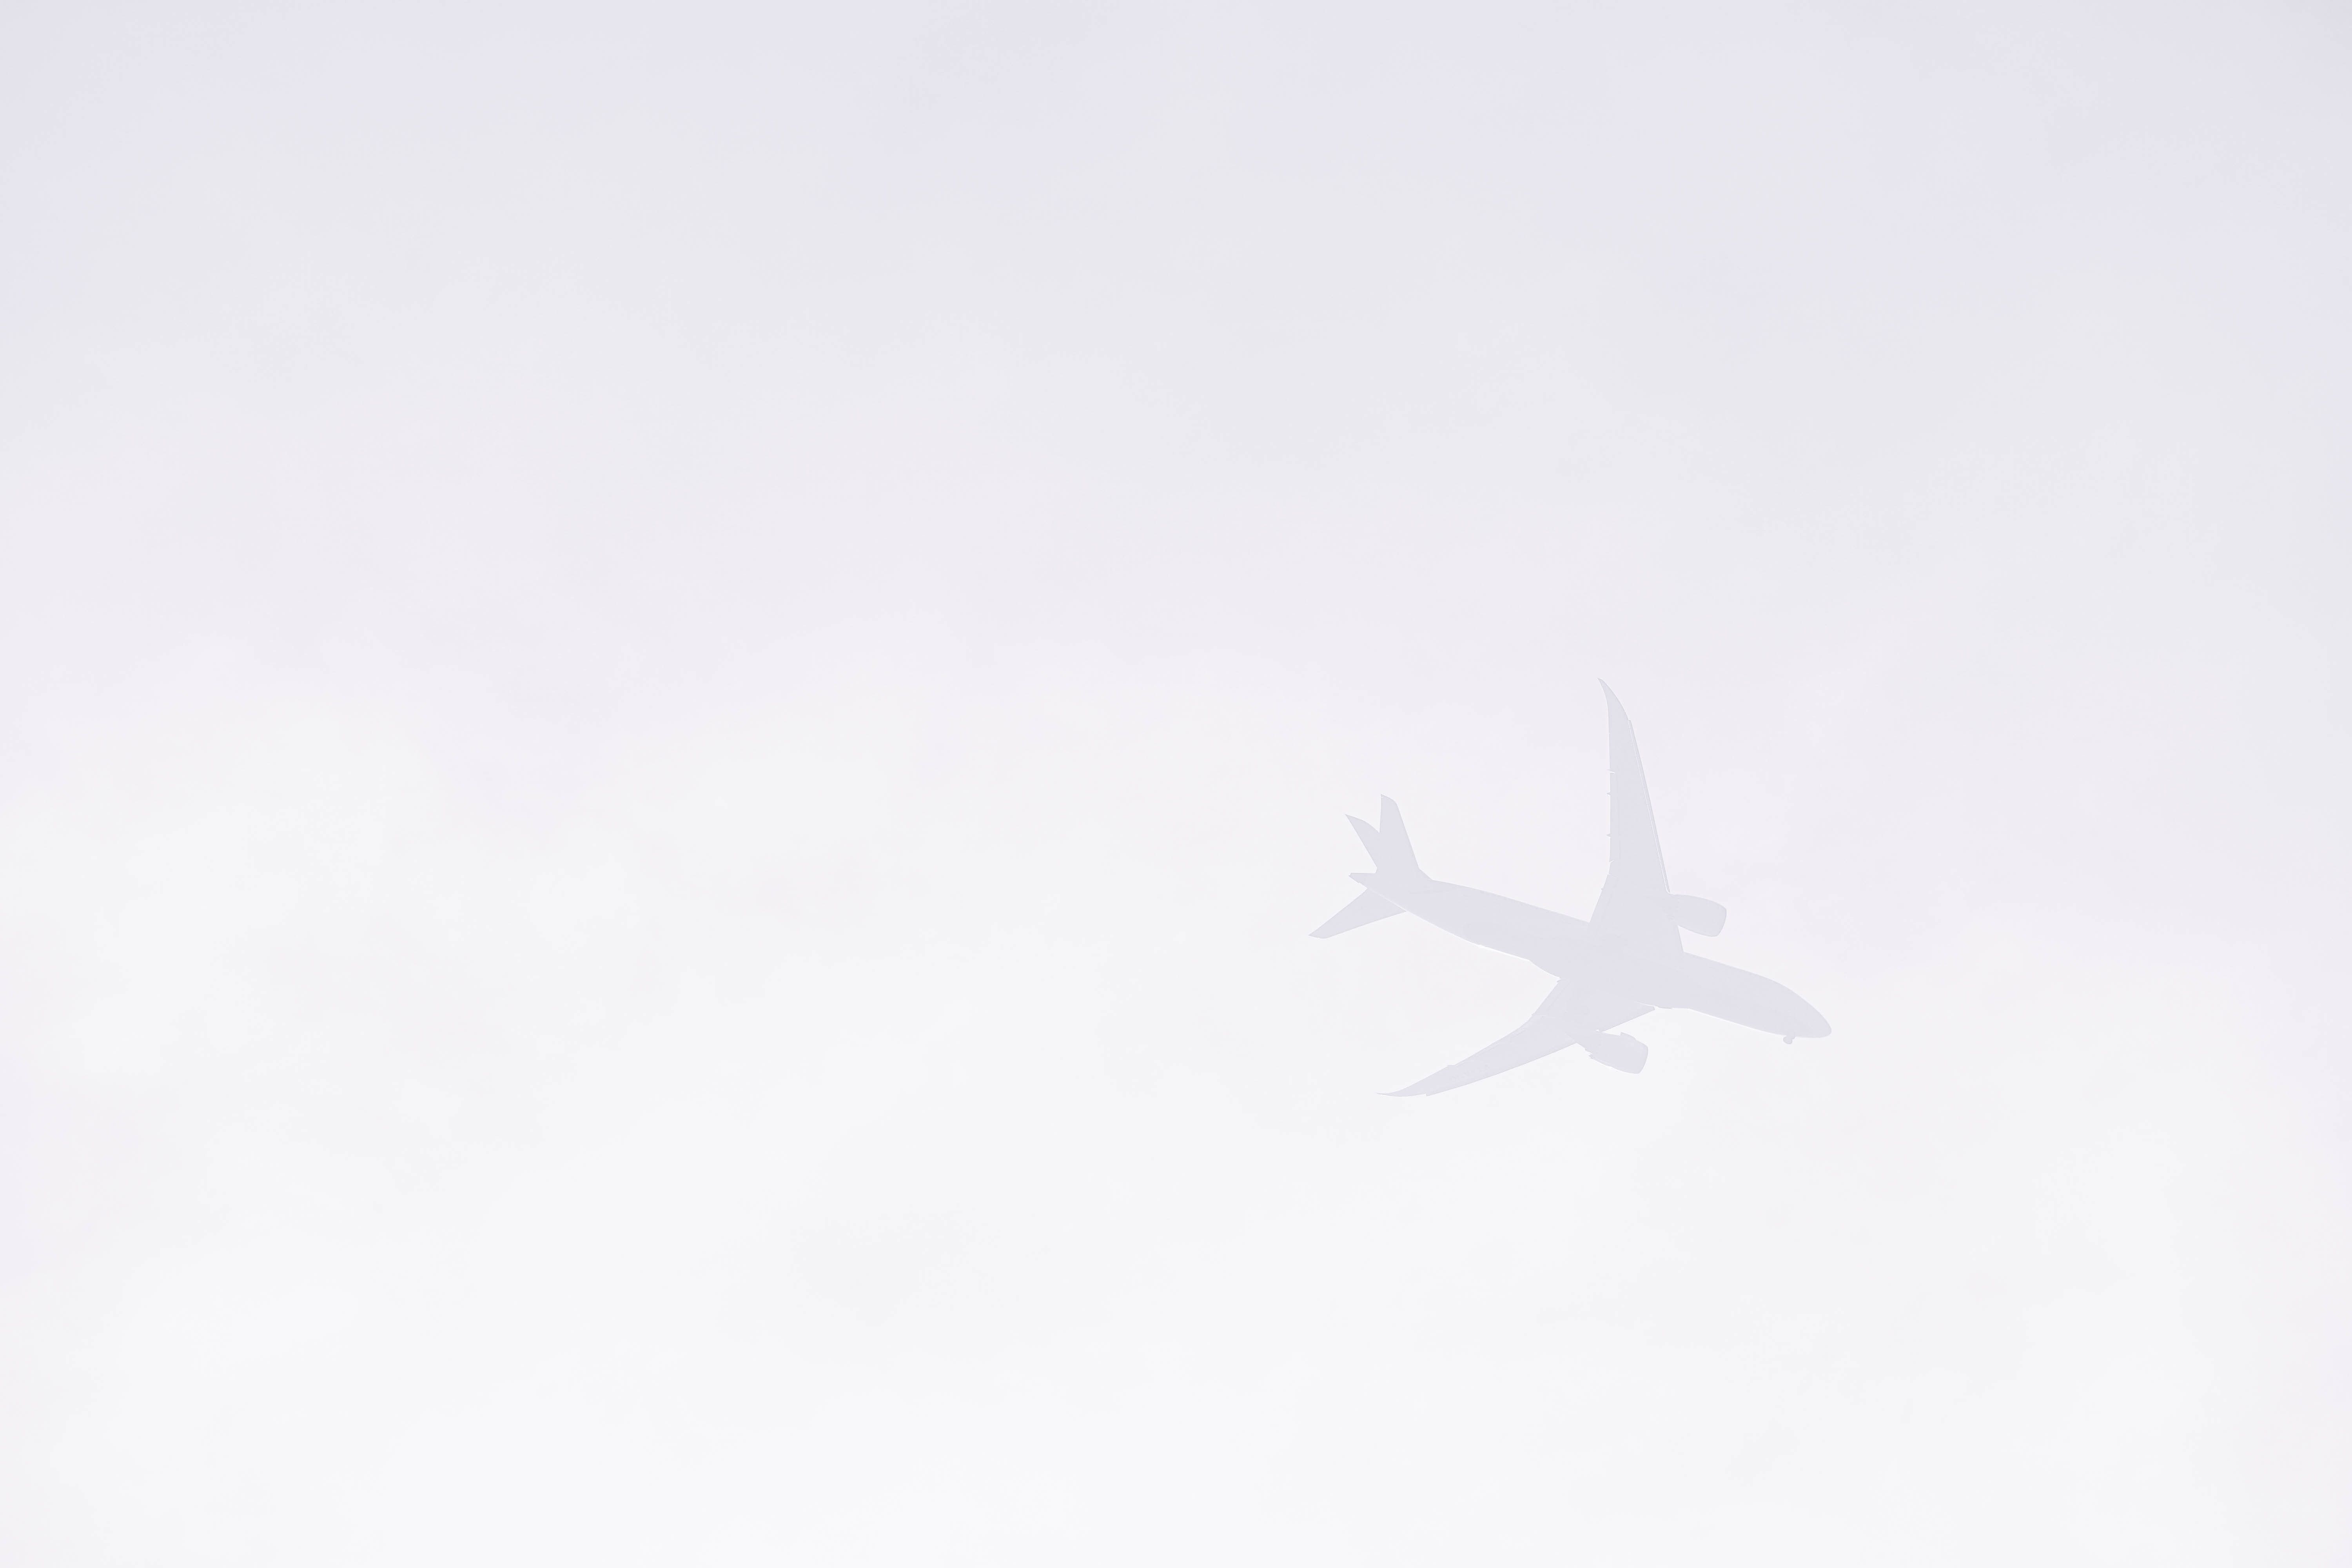 6000x4000 #travel, #white, #sky, #minimal, #flying, #airplane, # wallpaper, #cloudy, #aeroplane, #Free picture, #fly, #flight, #haze, #airline, #aircraft, #jet, #fade, #hazy, #airport. Mocah.org HD Desktop Wallpaper